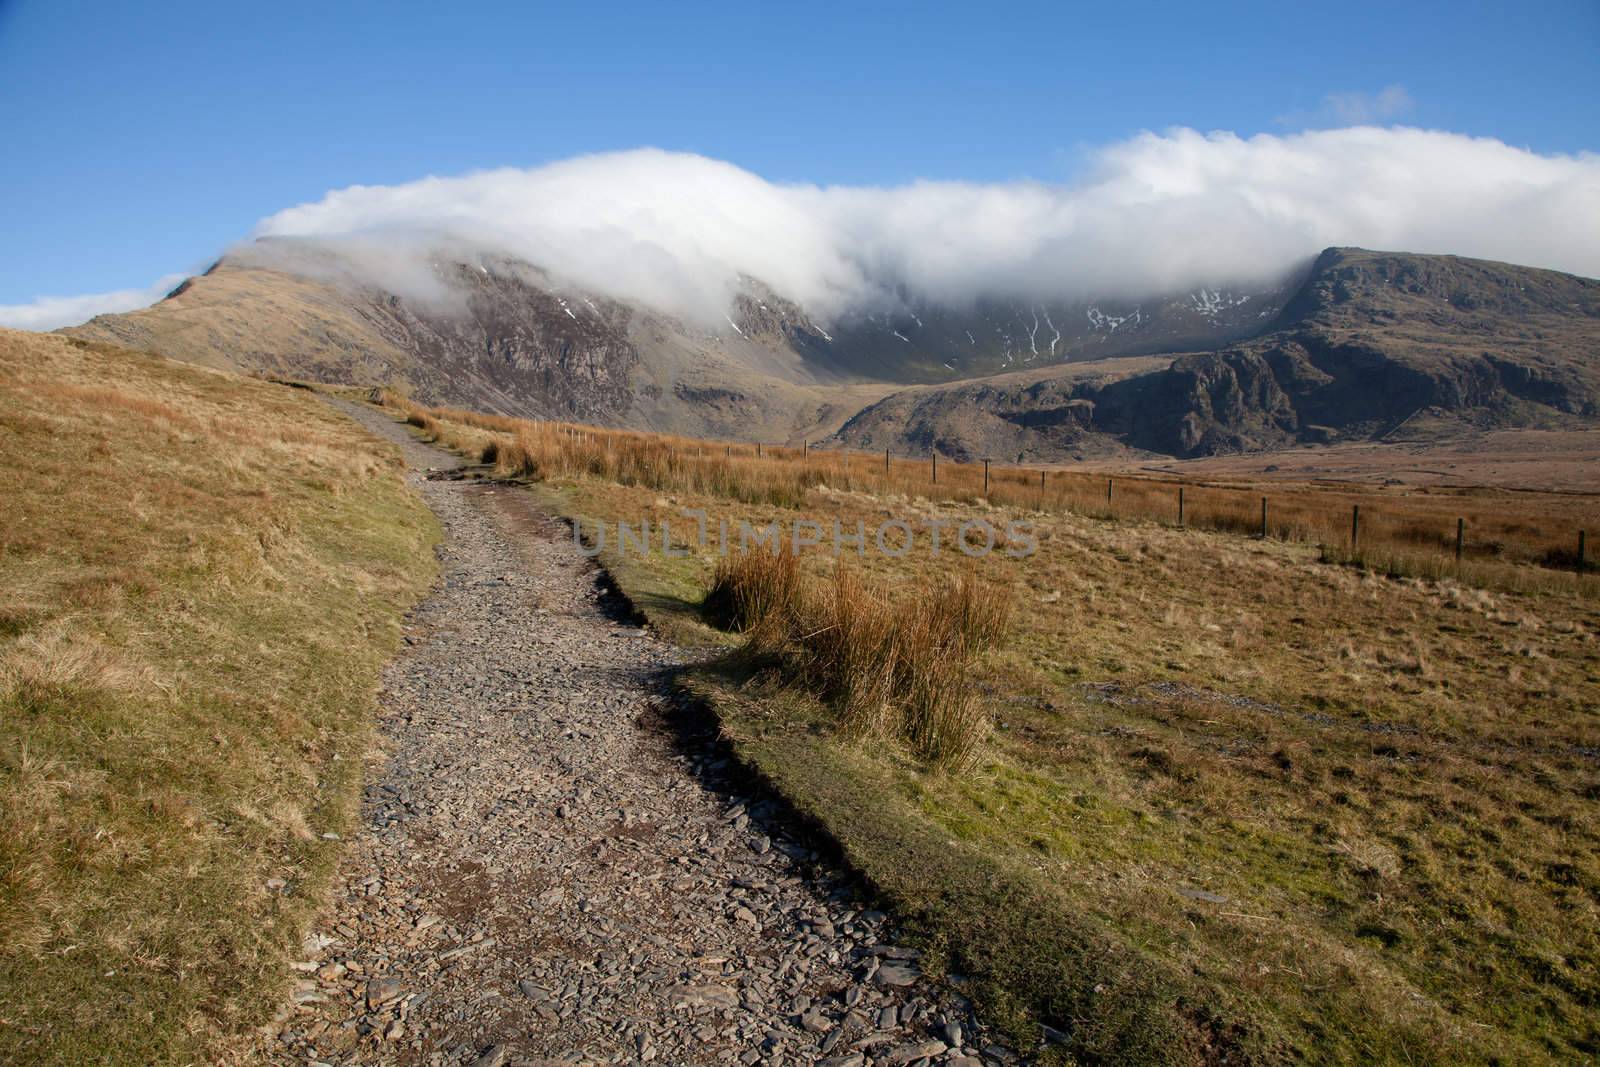 The Snowdon Ranger path cuts through moorland towards mount Snowdon. A cloud inversion is developing over the peak in the distance.